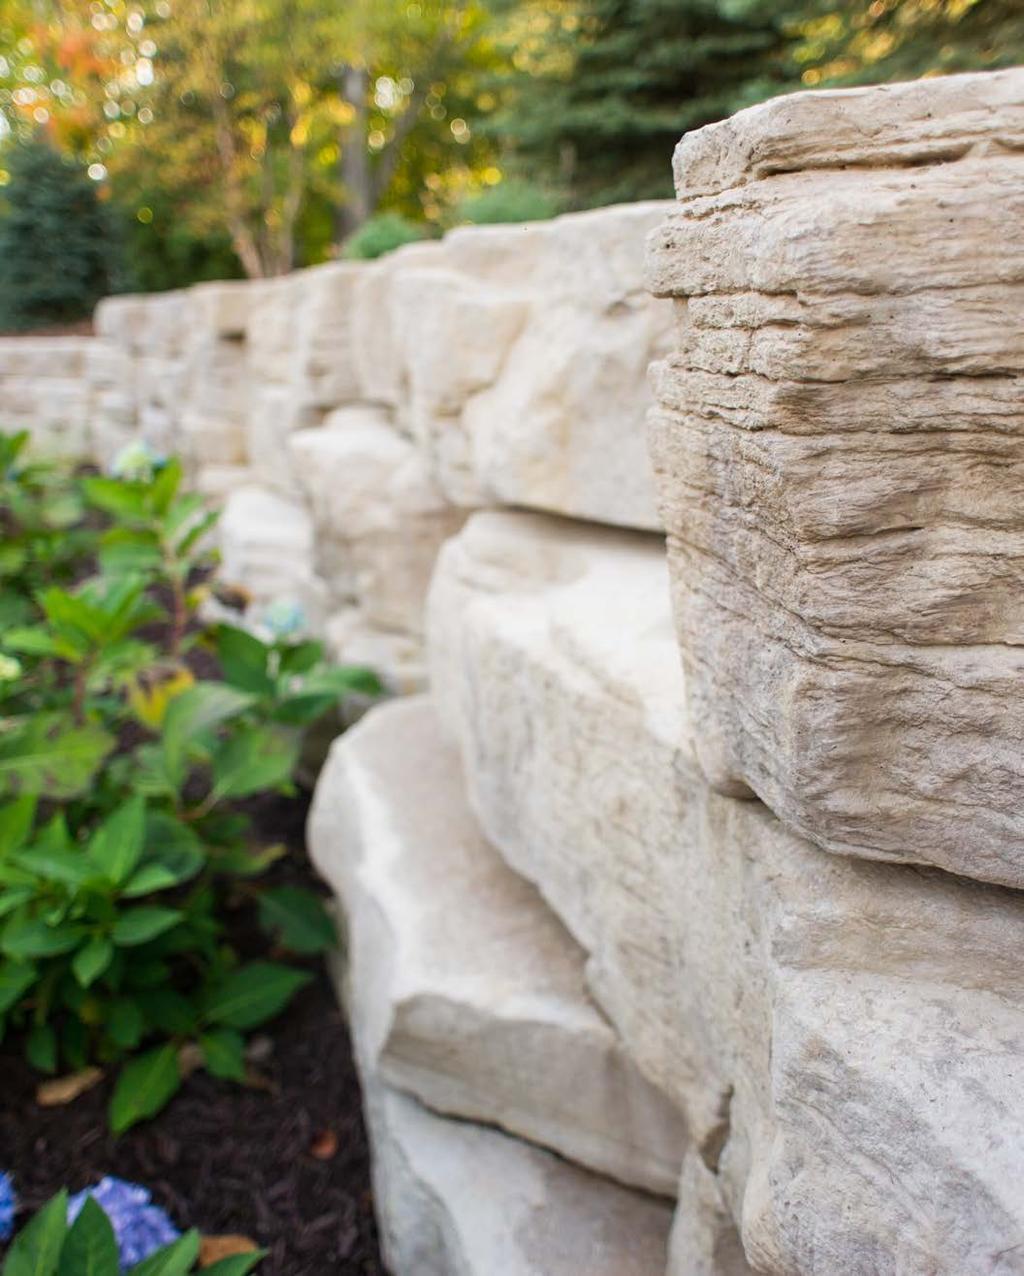 WHY ROSETTA Rosetta combines the rugged attractiveness of natural stone with the dimensional consistency and engineered benefits of precast concrete.